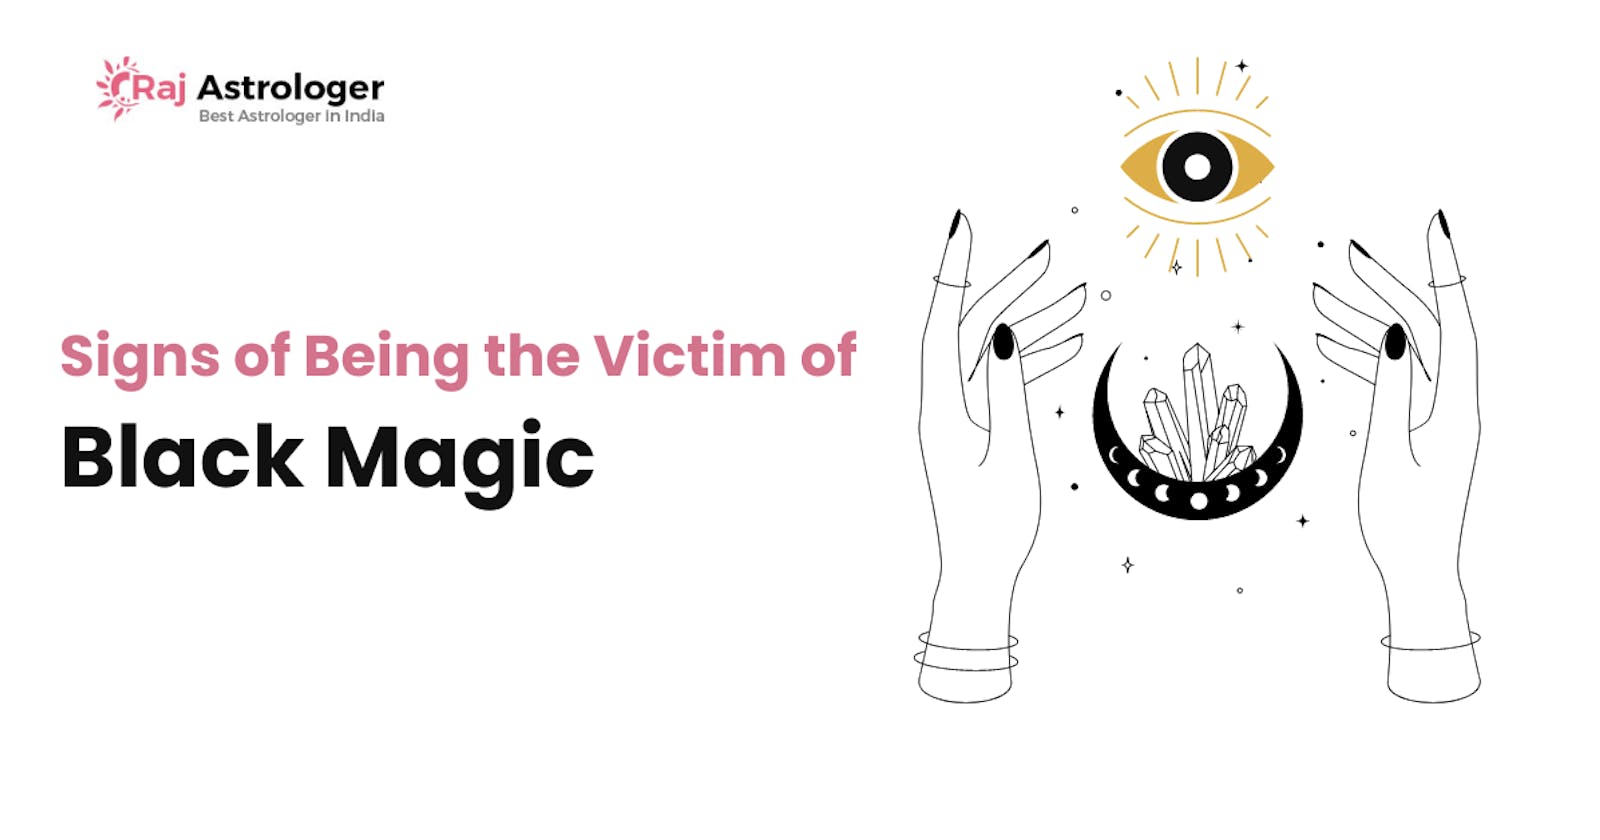 Signs of Being the Victim of Black Magic